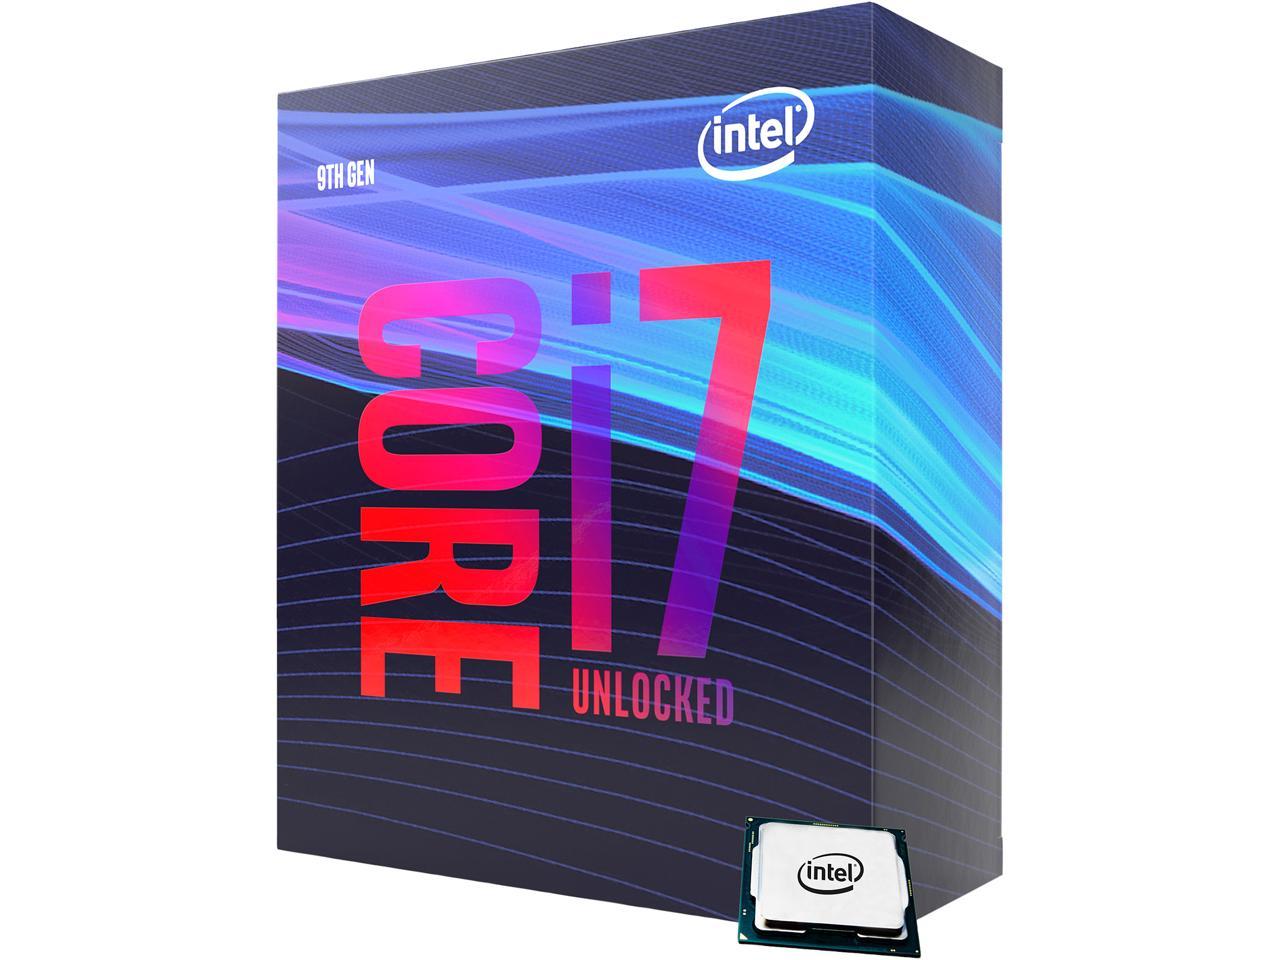 Micro Center Intel Core i7-9700KF OEM Desktop Processor 3.6GHz 8 Cores Unlocked Without Processor Graphics LGA1151 300 Series 95W with ASUS Prime Z390-A Motherboard ATX DDR4 DP HDMI M.2 USB 3.1 Gen2